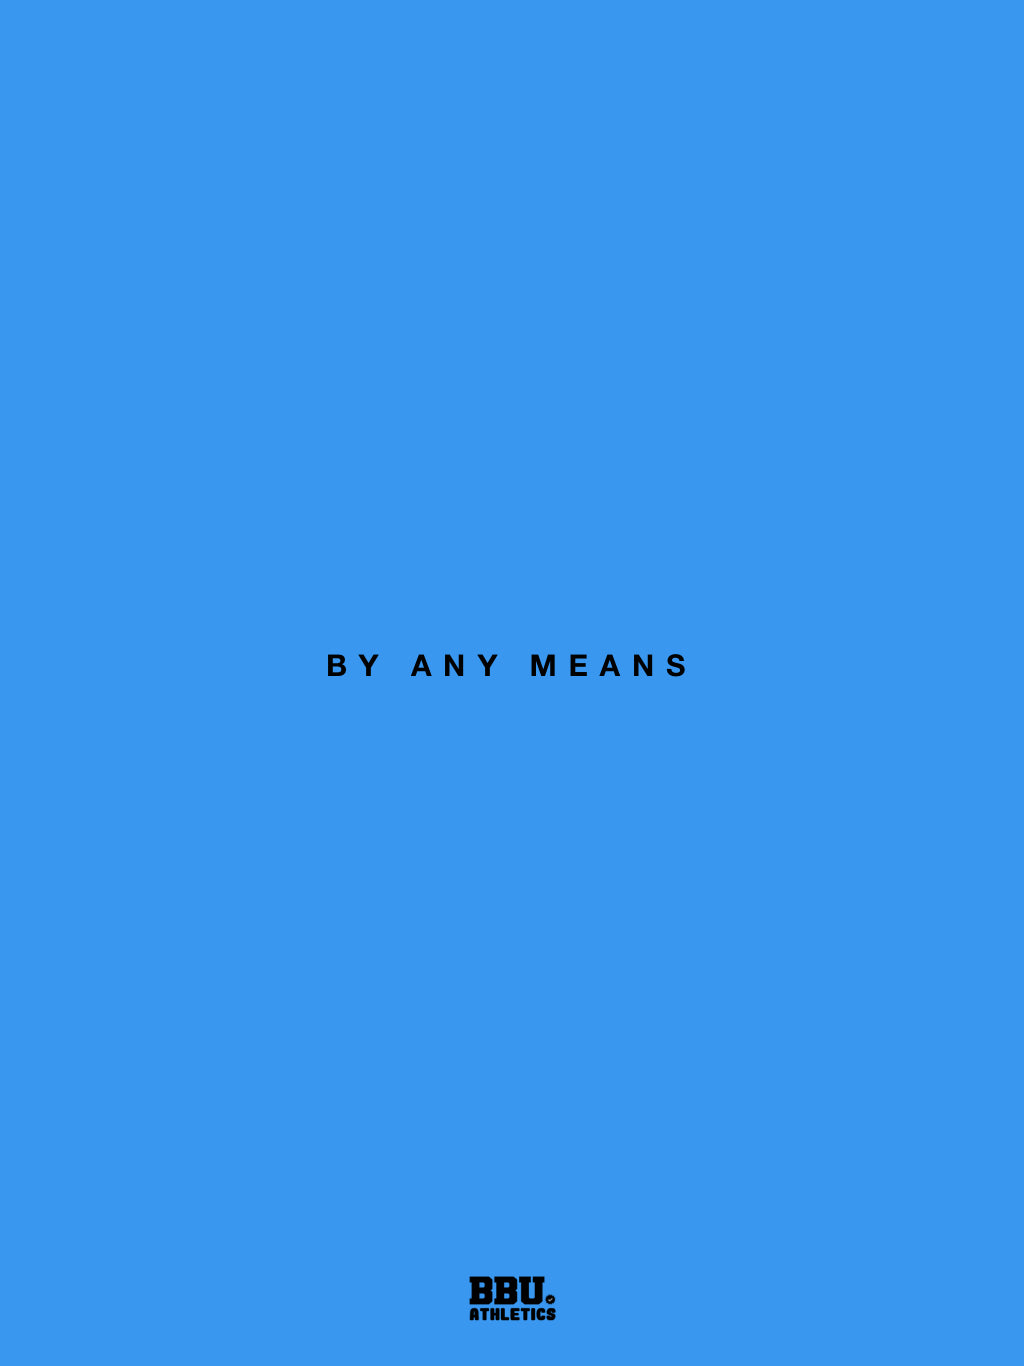 'BY ANY MEANS' Digital Planner